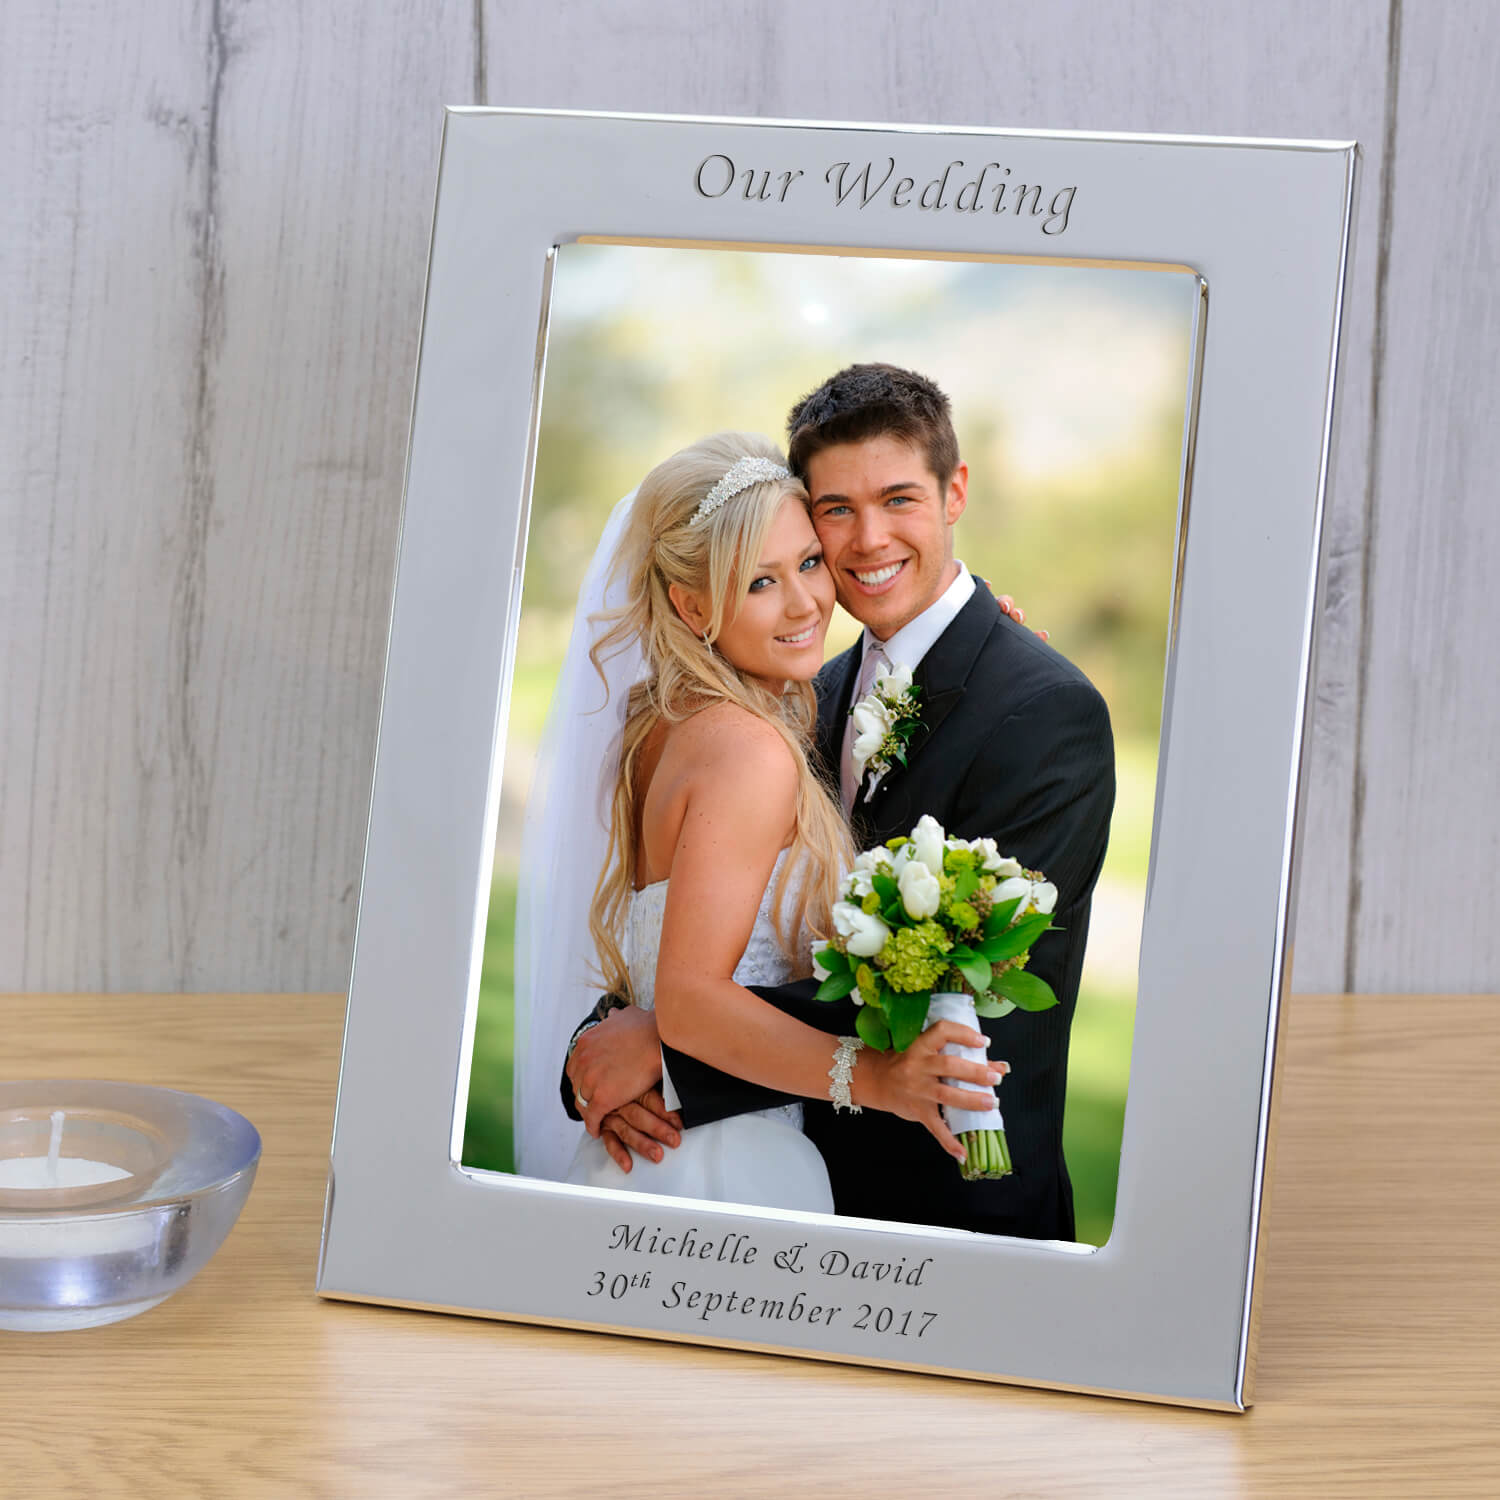 Personalised Silver Plated Photo Frame – Our Wedding